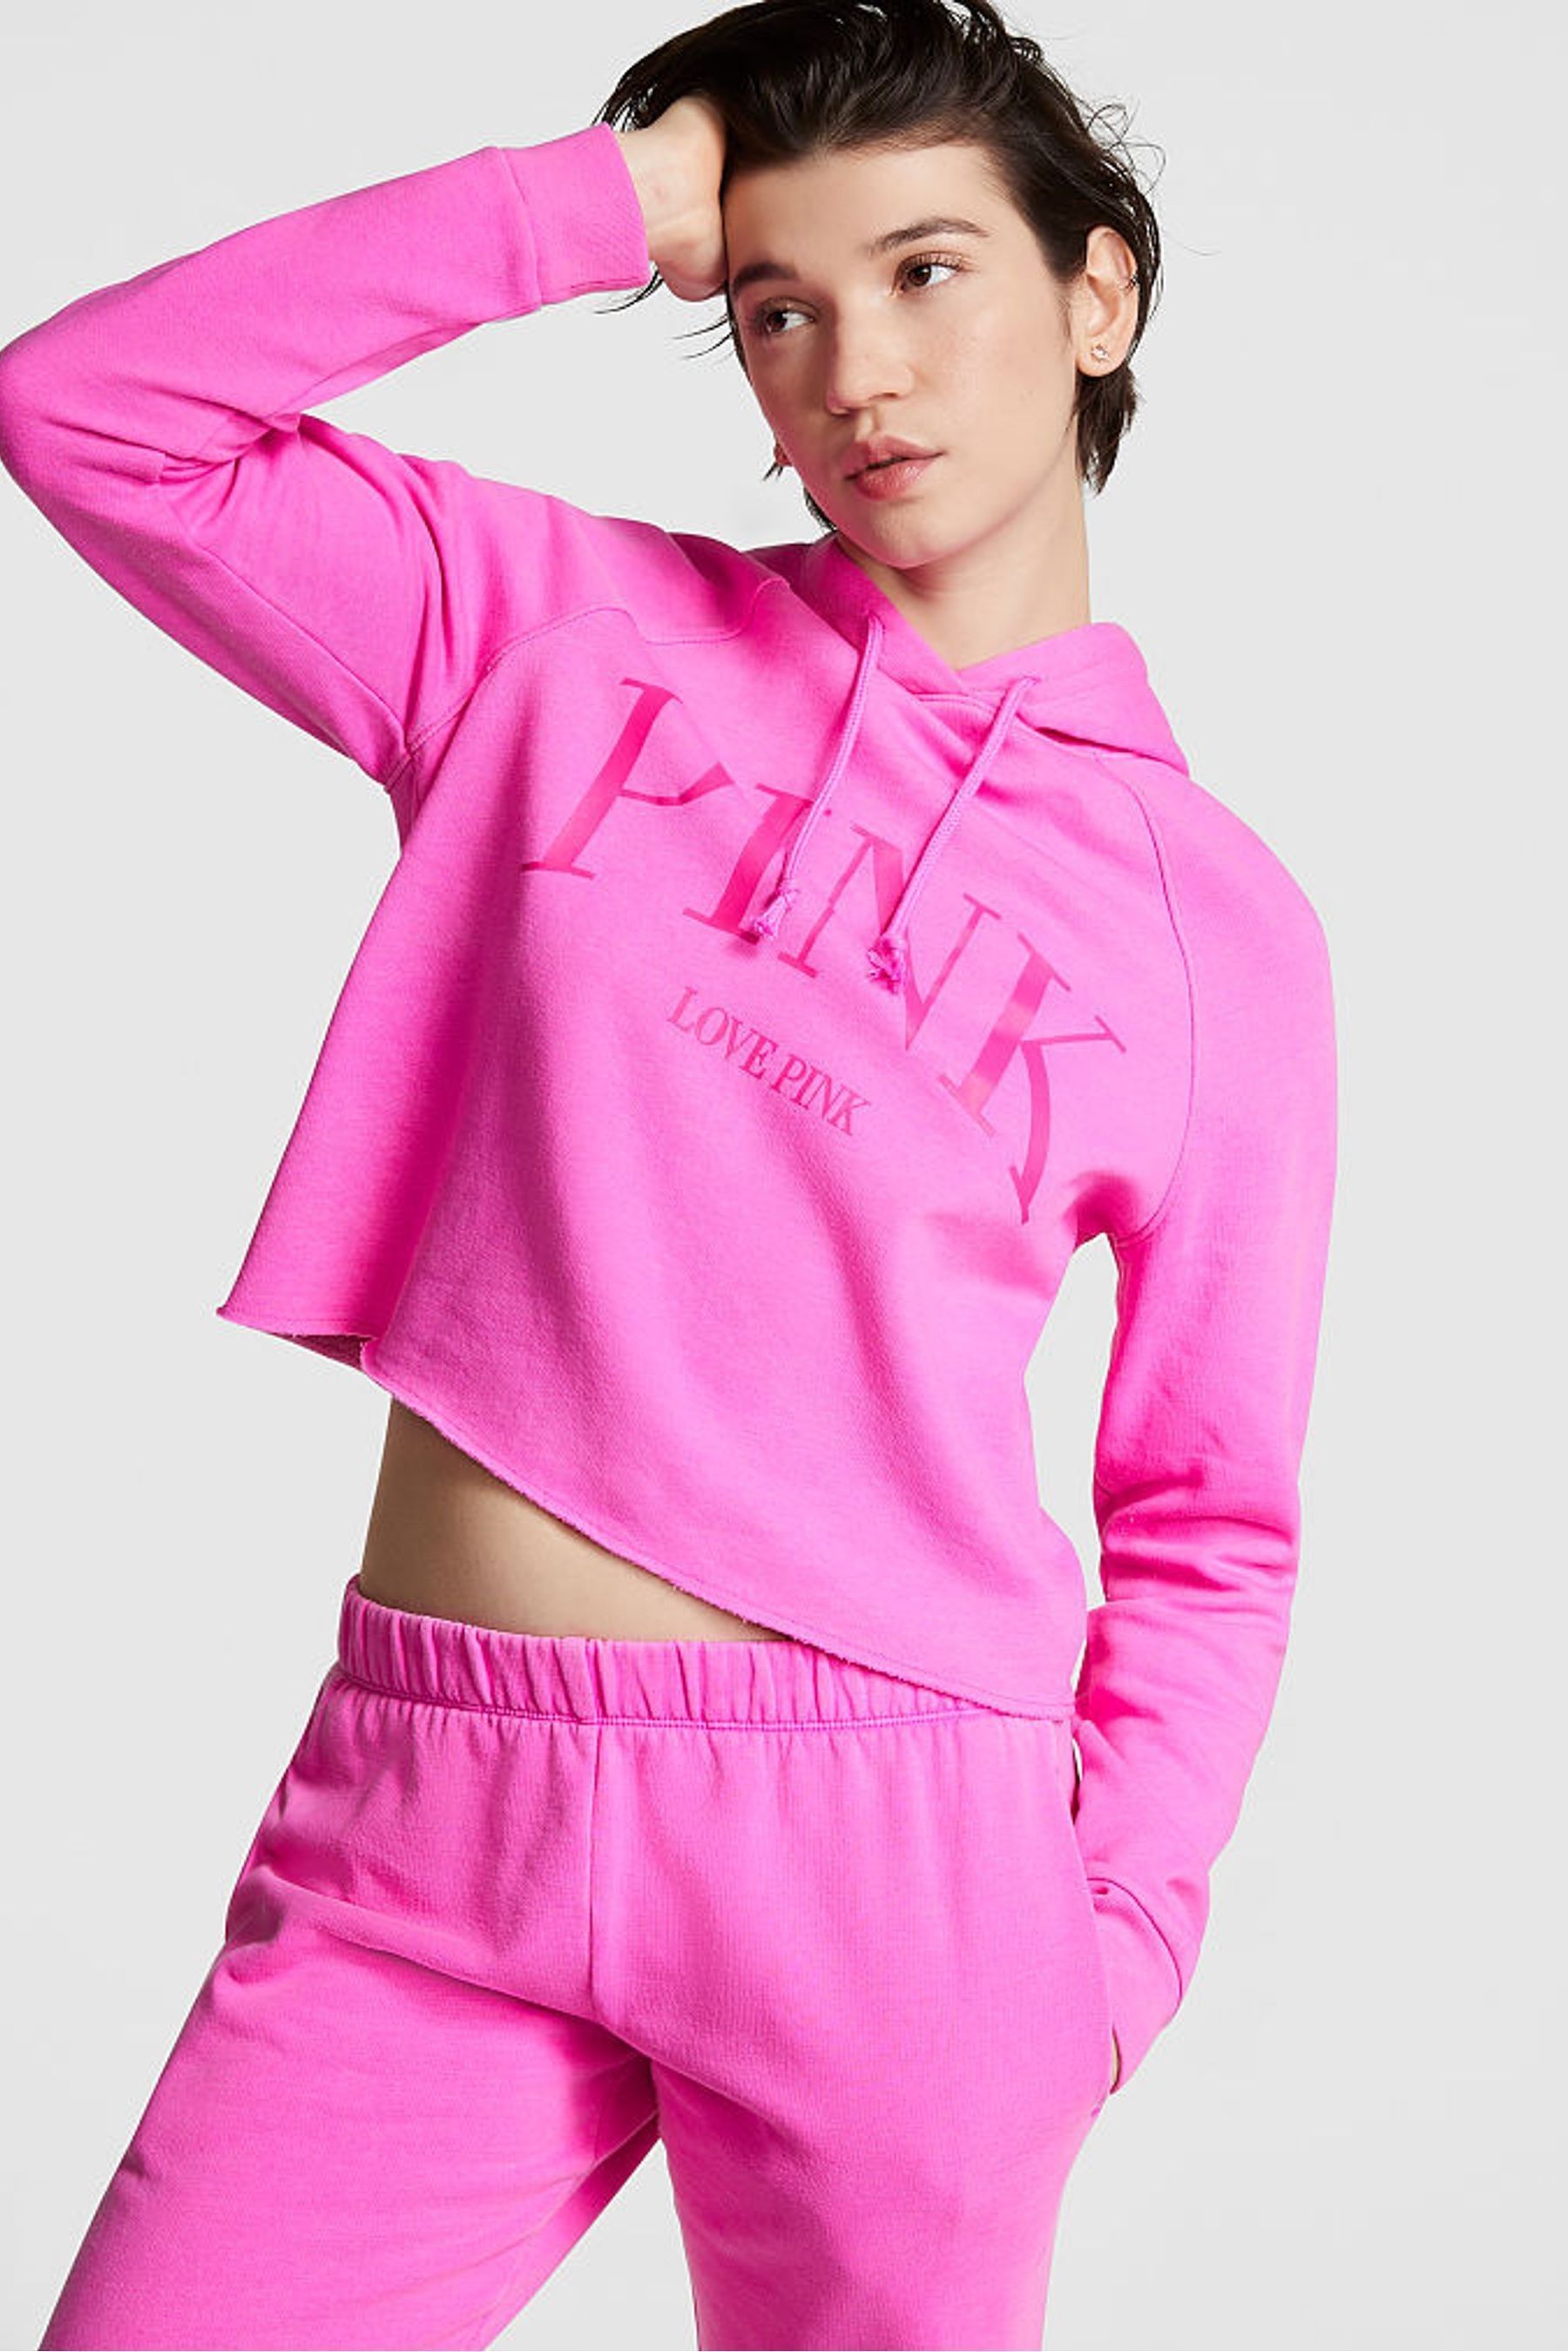 Buy Victoria's Secret PINK Fleece Cropped Hoodie from the Victoria's ...